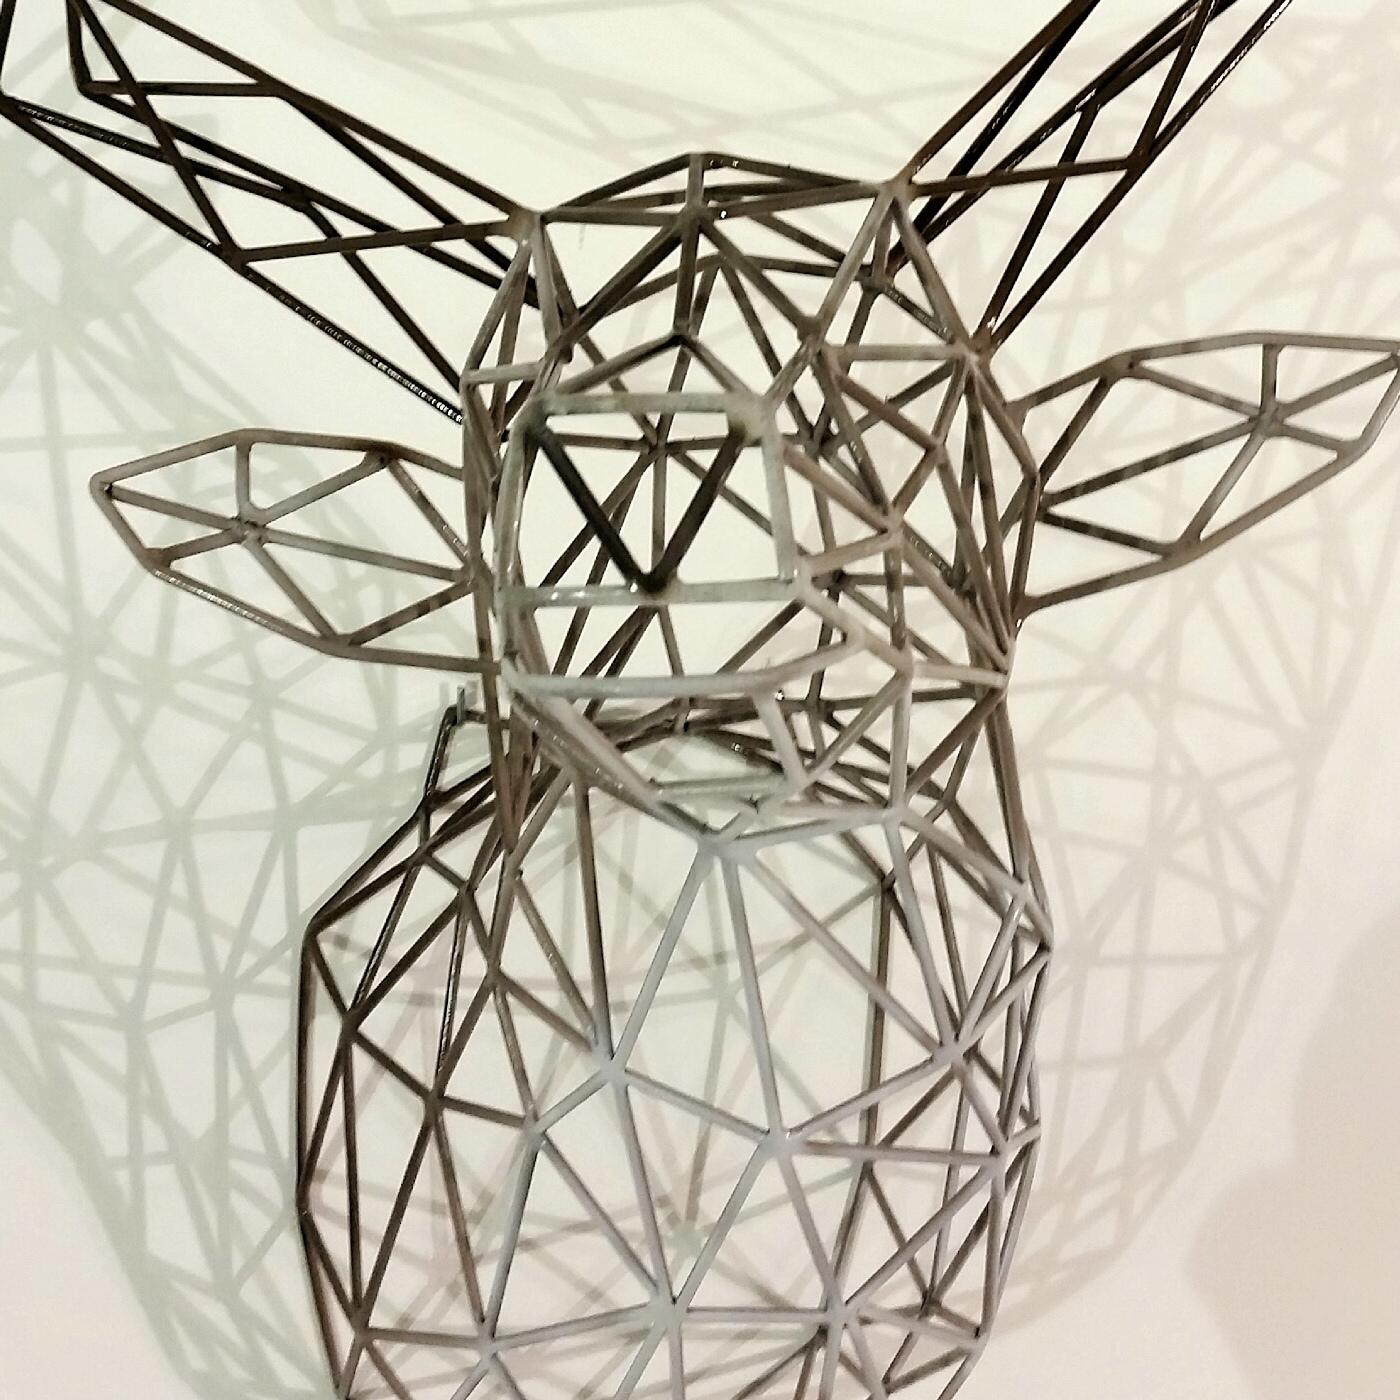 This sumptuous sculpture is crafted entirely by hand by Aletergo without the assistance of electronic tools. The artist reinterprets in a modern and playful way a traditional trophy, rendering the silhouette of a majestic deer head using iron rods